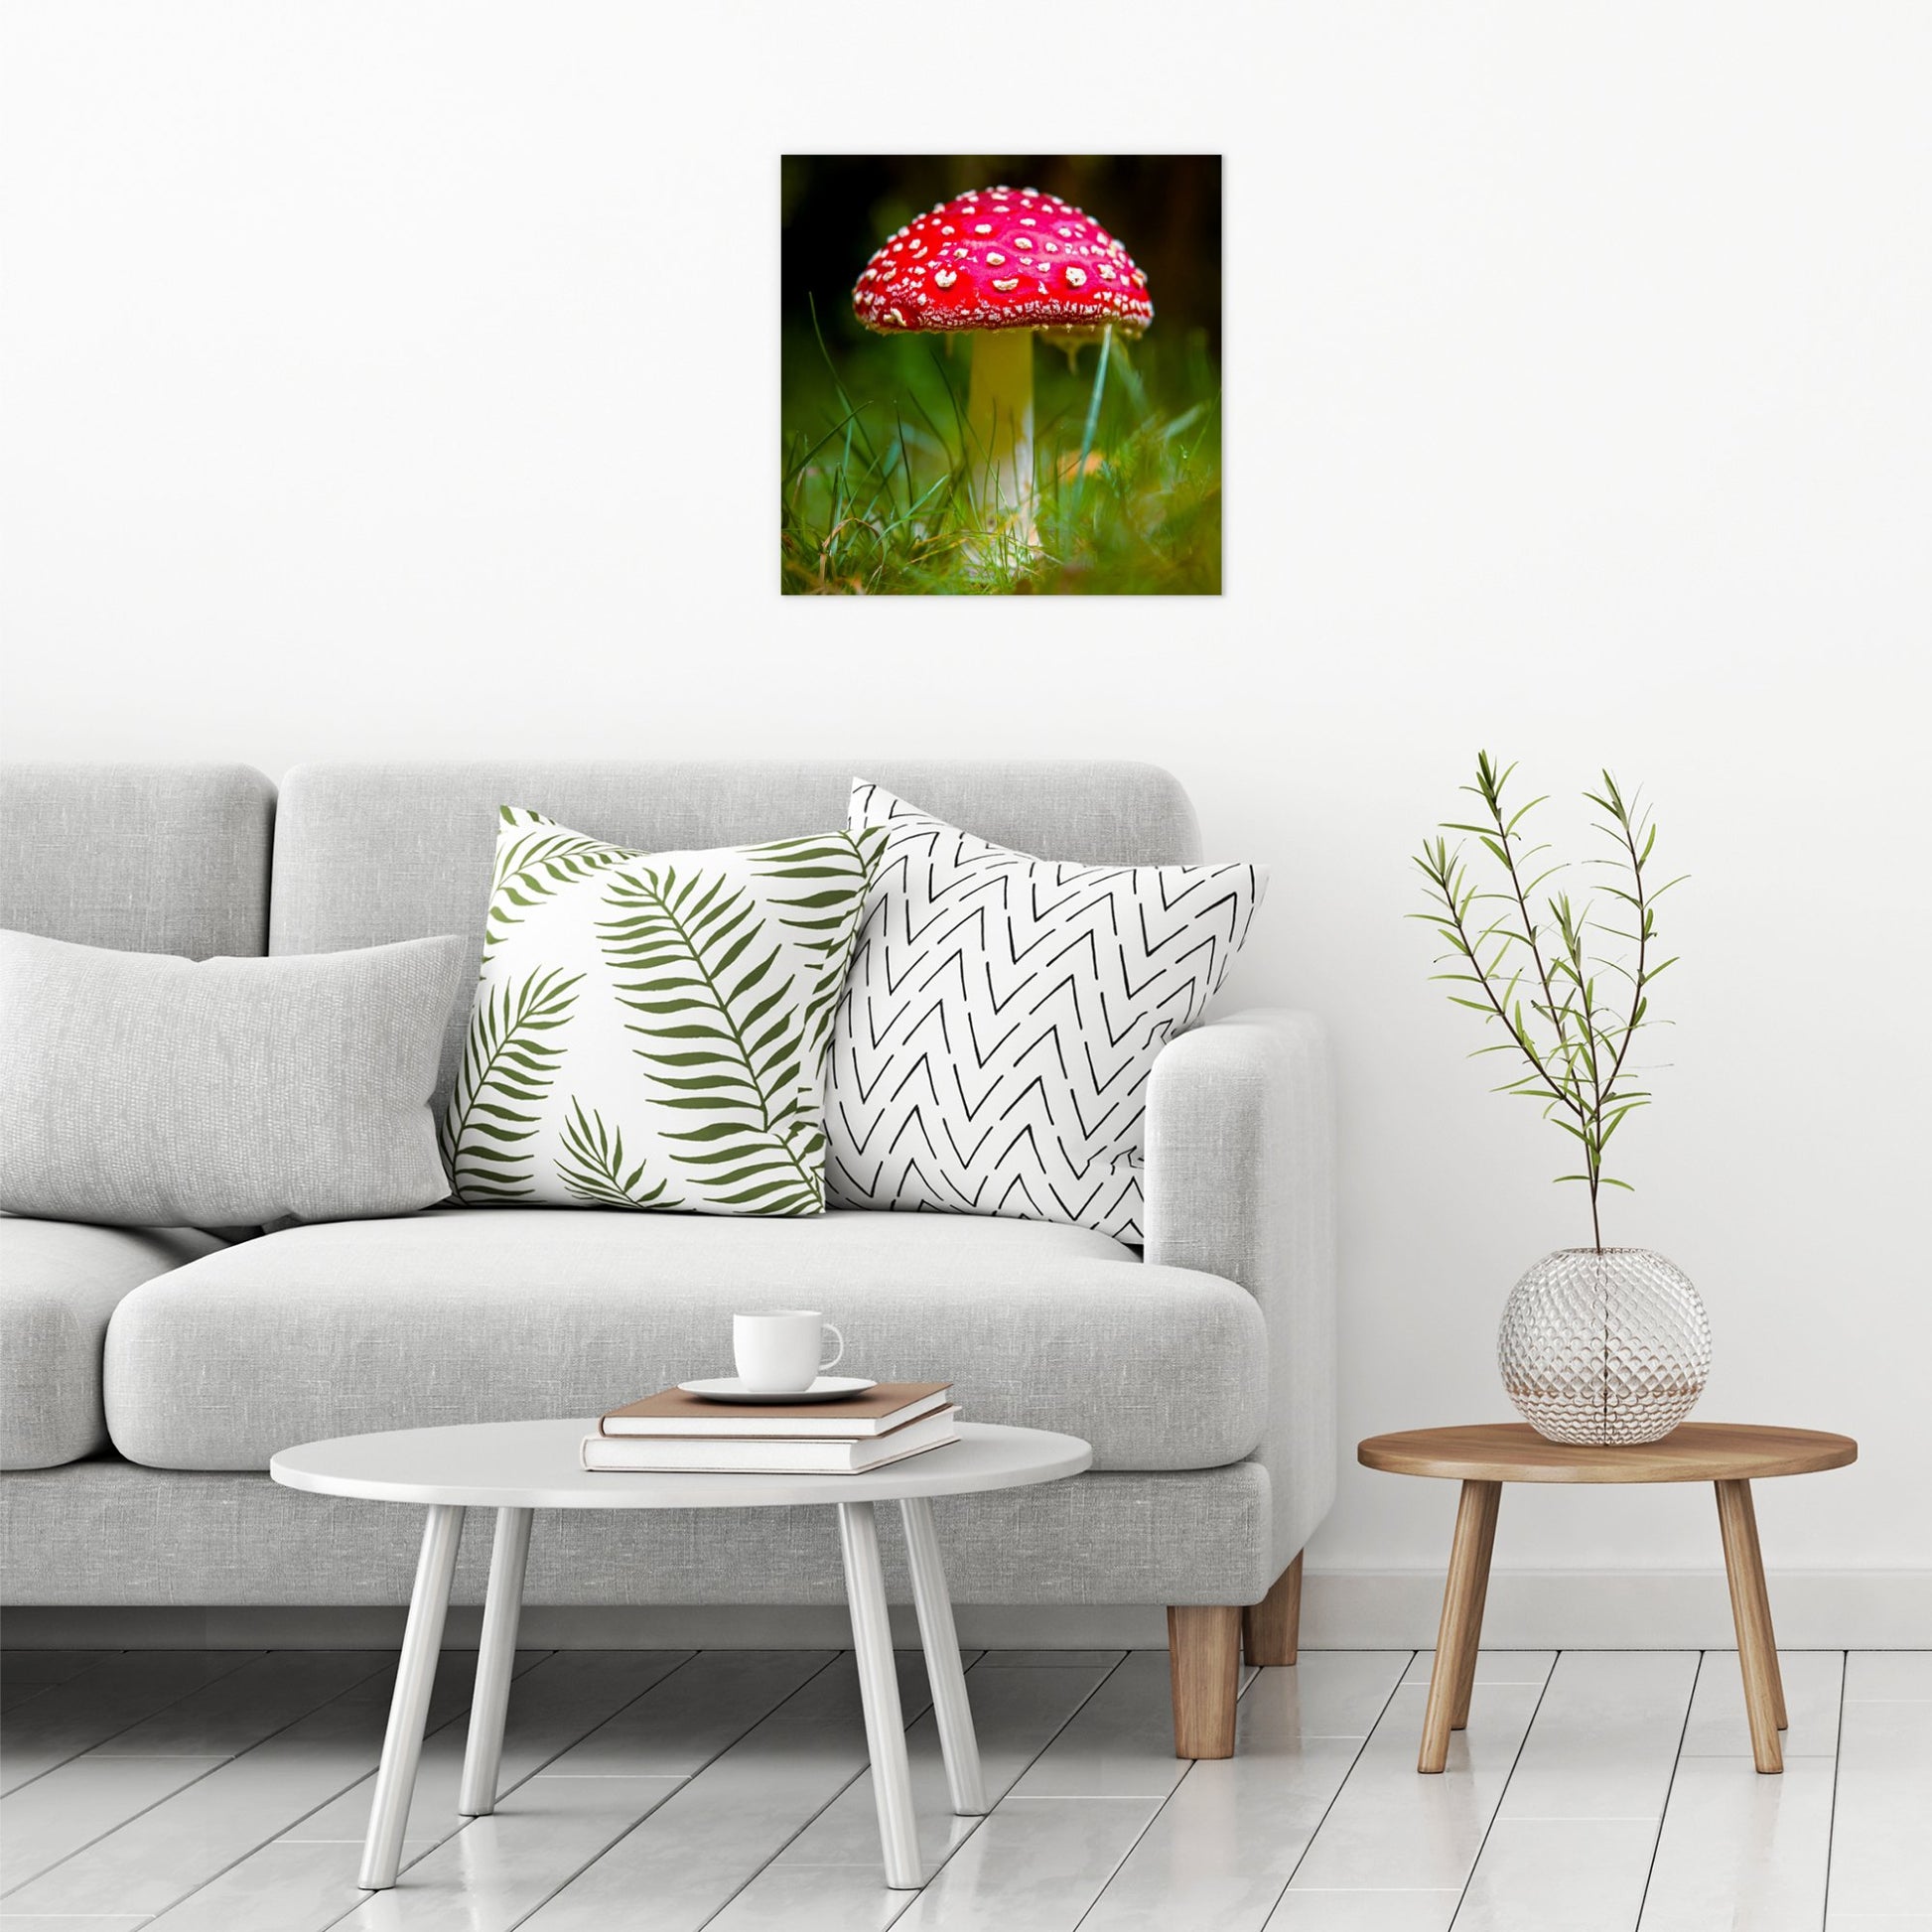 A contemporary modern room view showing a large size metal art poster display plate with printed design of a Fly Agaric (Amanita muscaria) Fungi